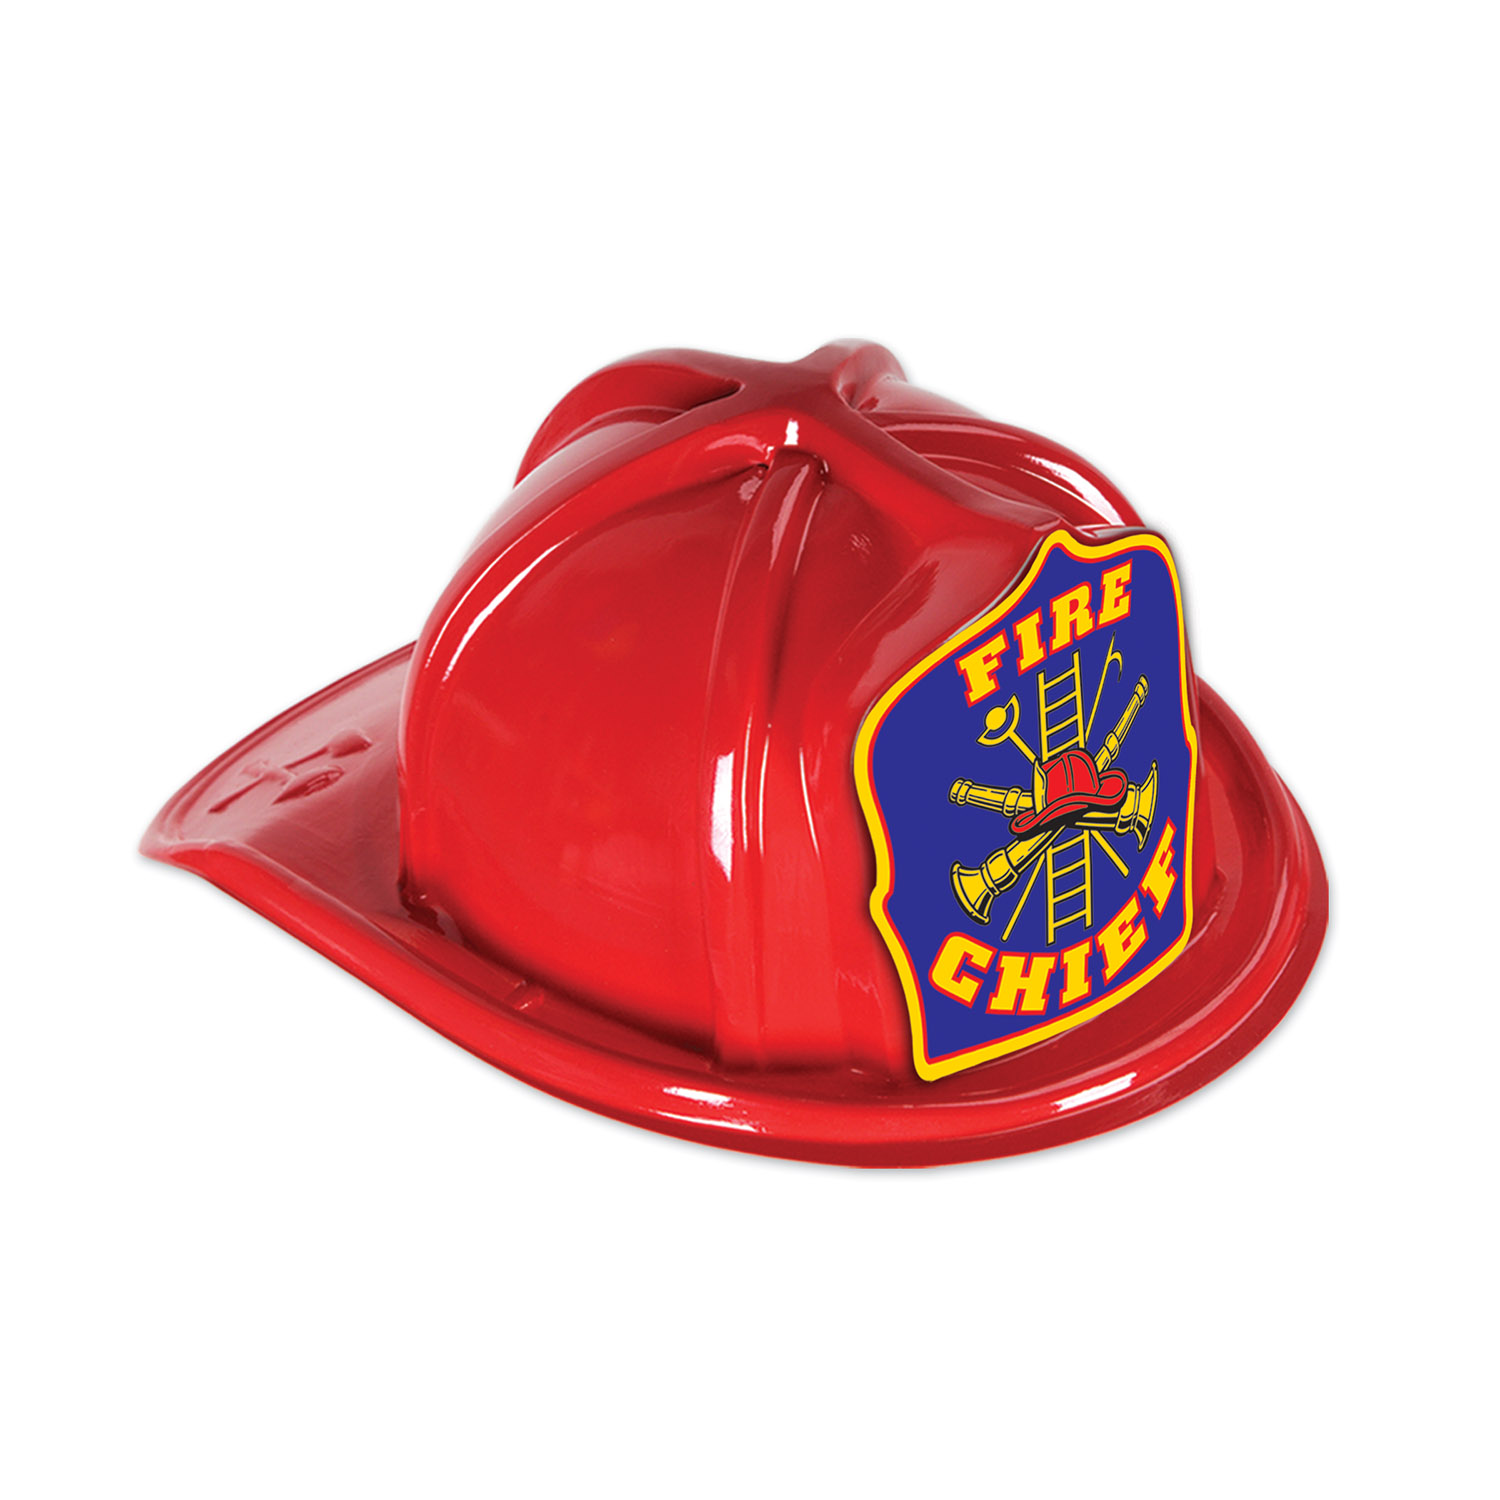 RED Plastic Fire Chief HAT